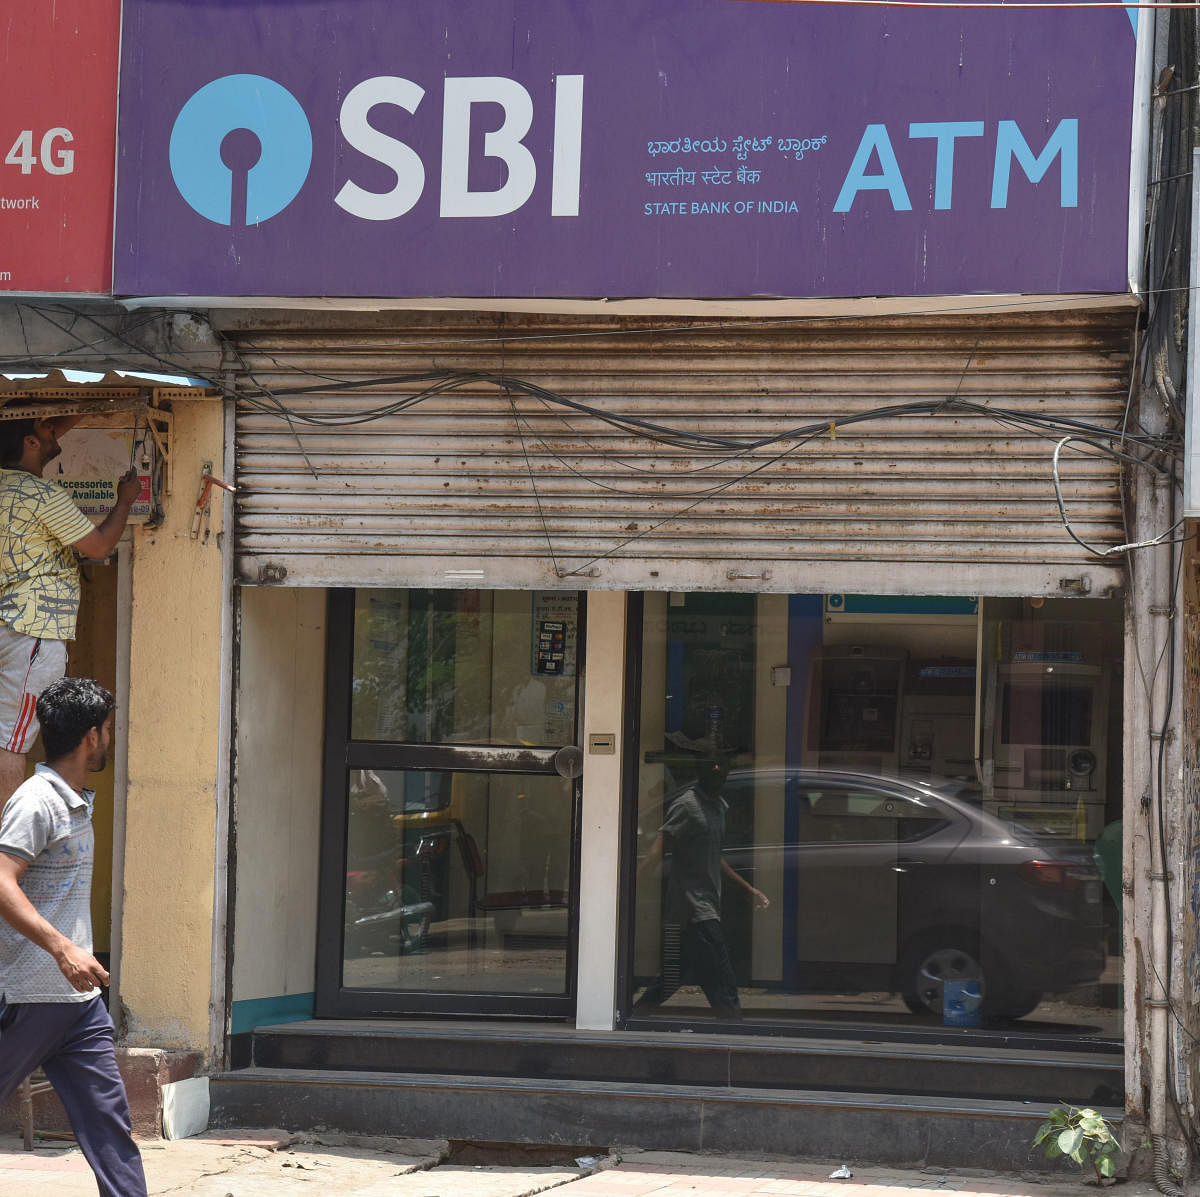 Banks shut down 1,817 ATMs since July, shows RBI data